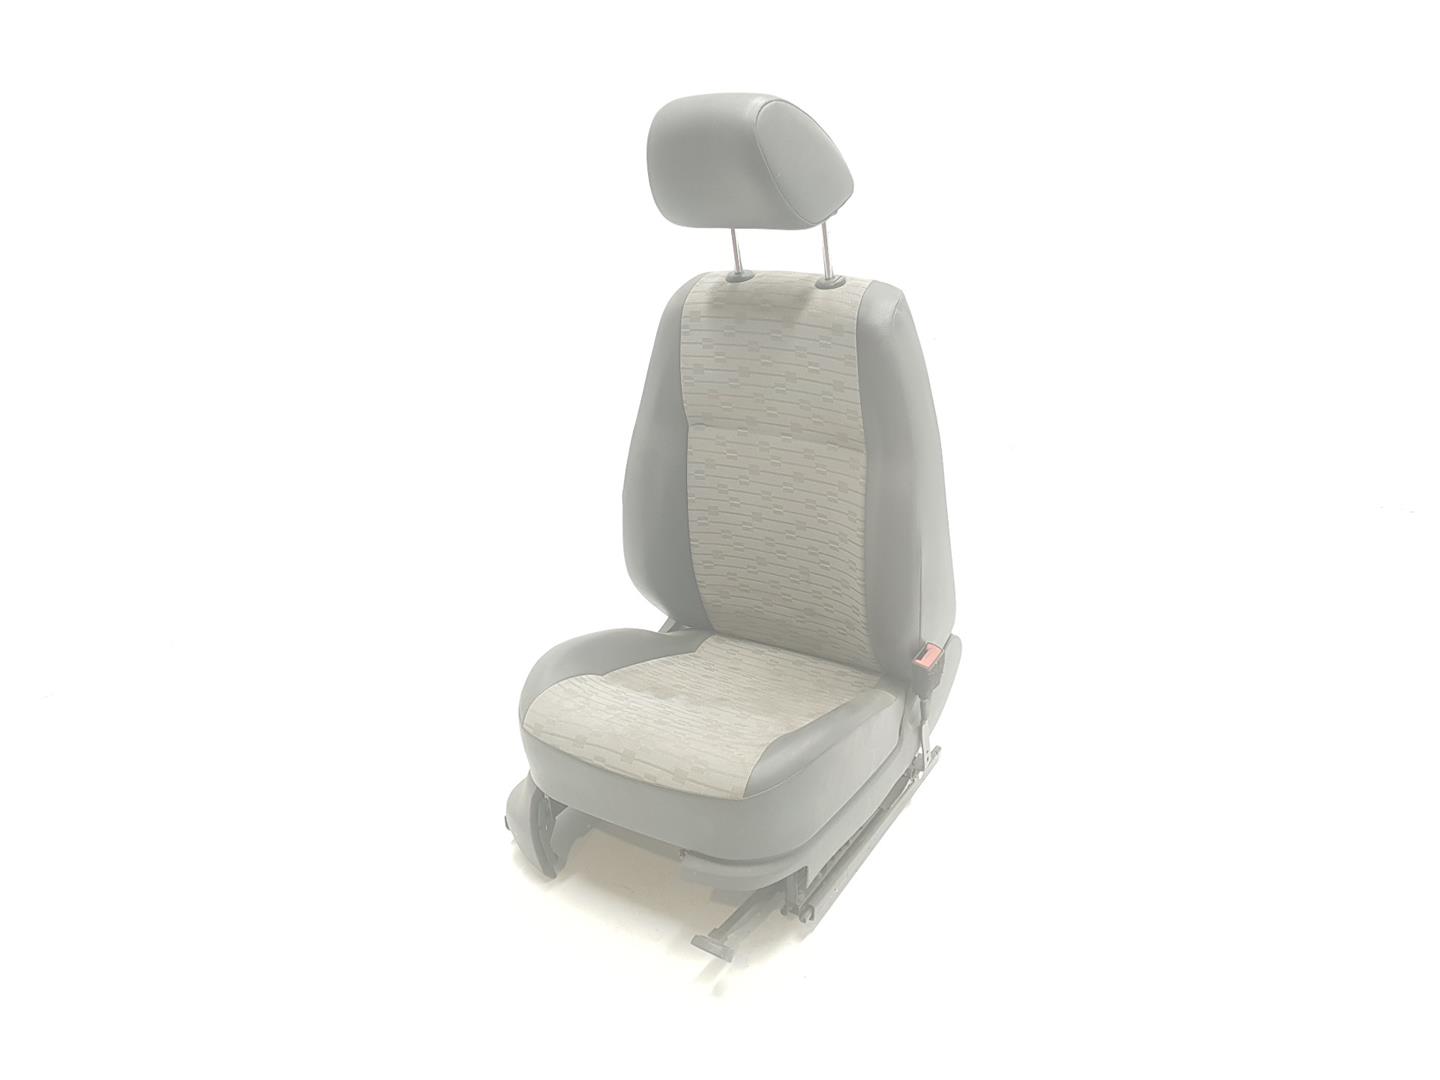 VOLKSWAGEN Caddy 3 generation (2004-2015) Front Right Seat ENTELA, MANUAL 24233016